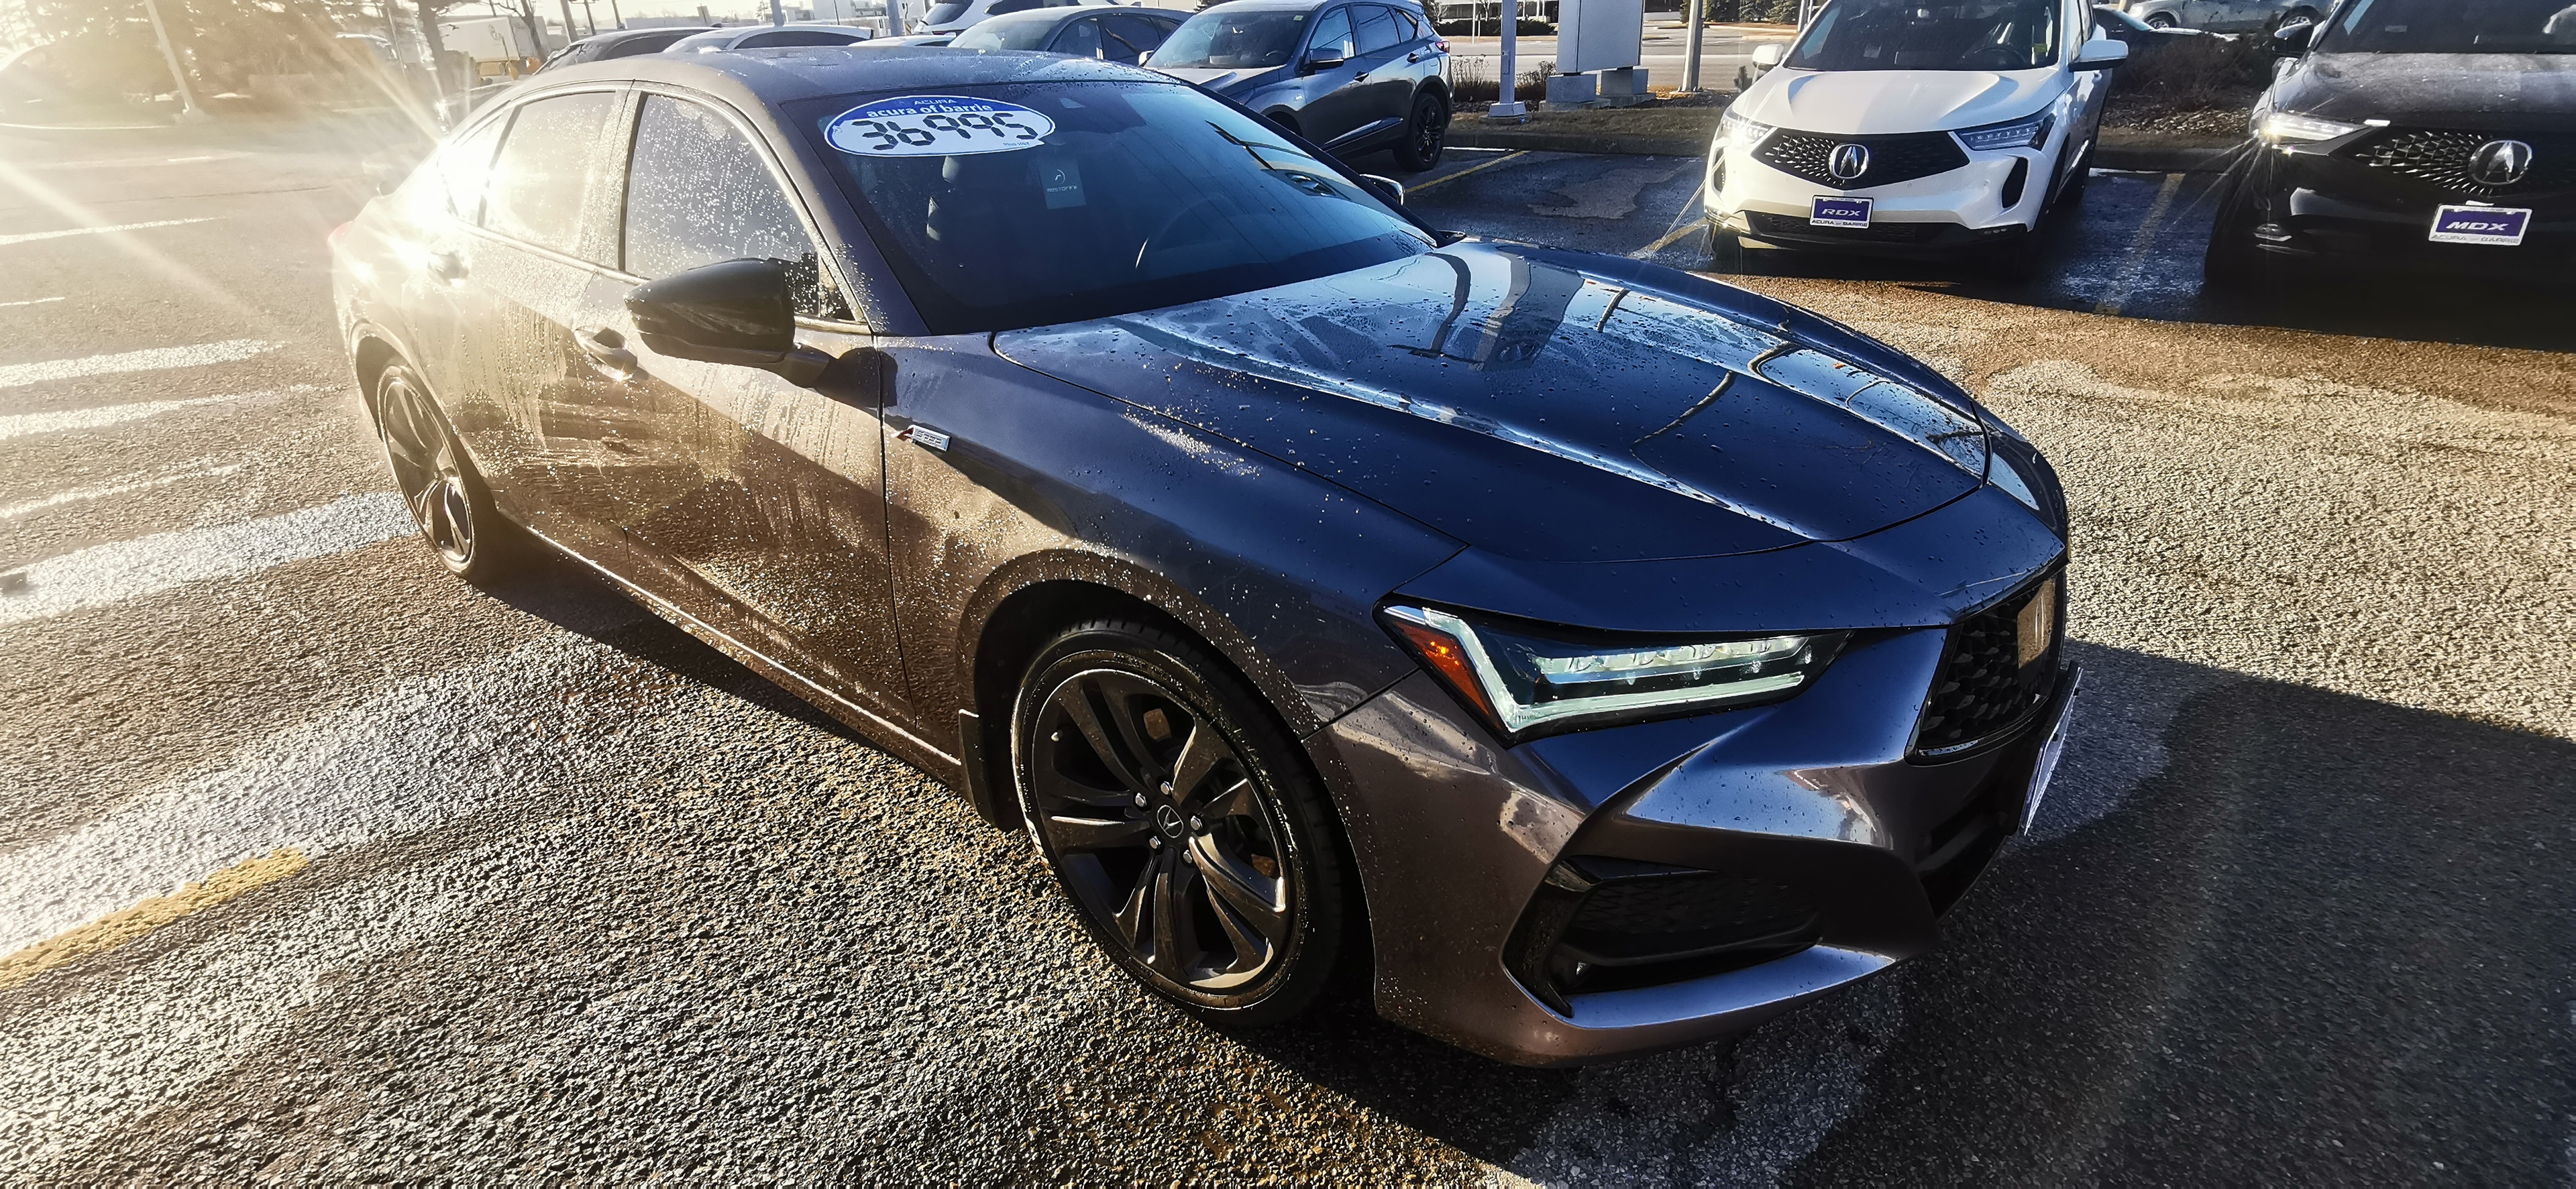 2021 Acura TLX A-Spec SH-AWD Sport Styling, black accented!